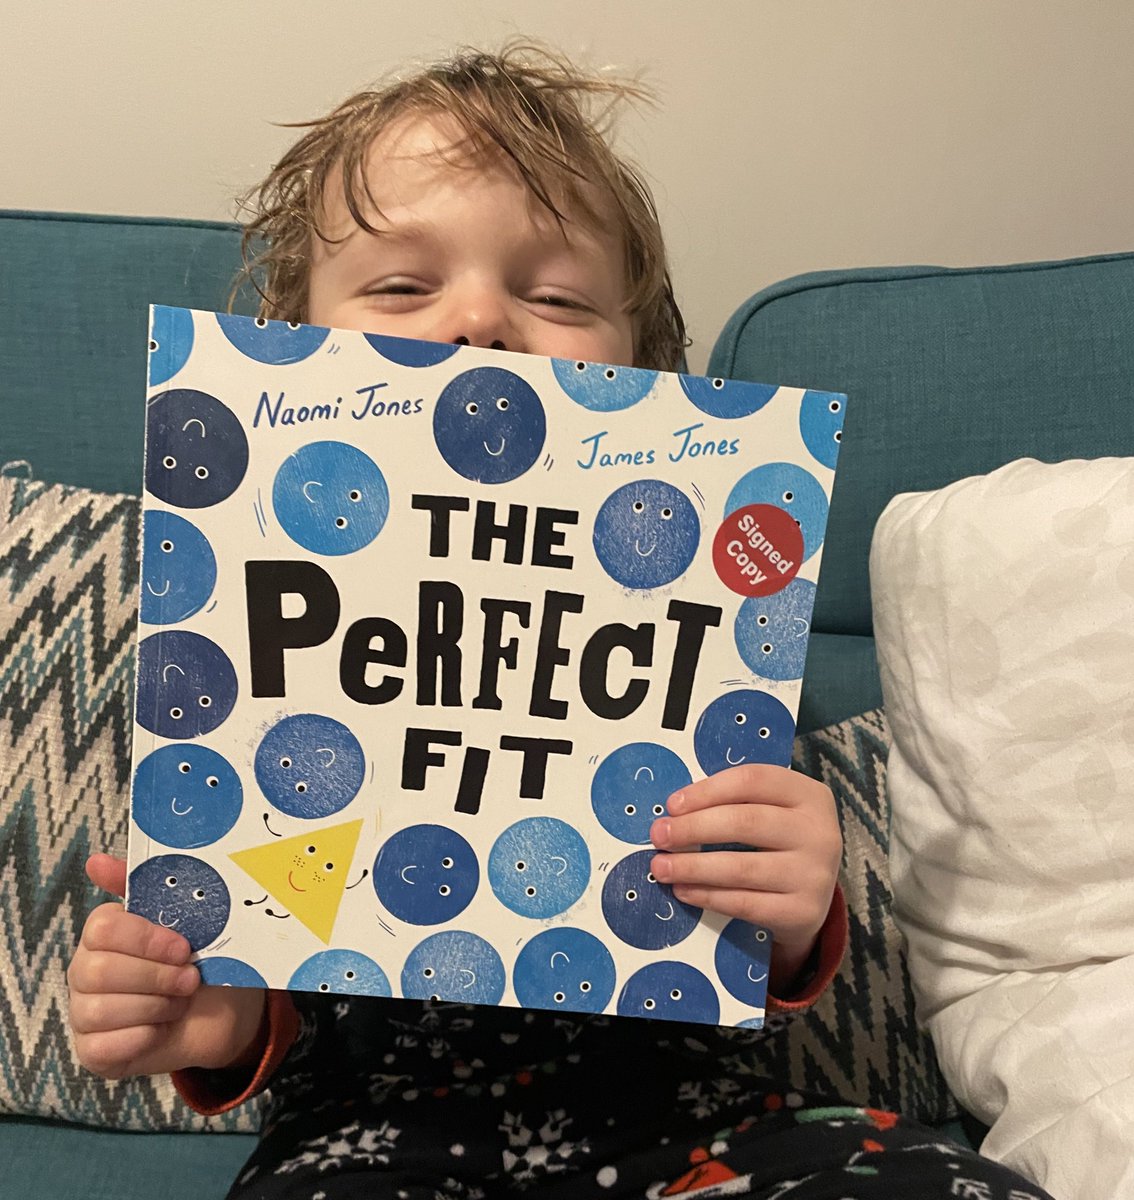 He was supposed to be choosing a World Book Day book with his token but was absolutely determined to get this one instead @NaomiJones_1 @JamesPaulJones ☺️ @GriffinBooksUK @OxfordChildrens